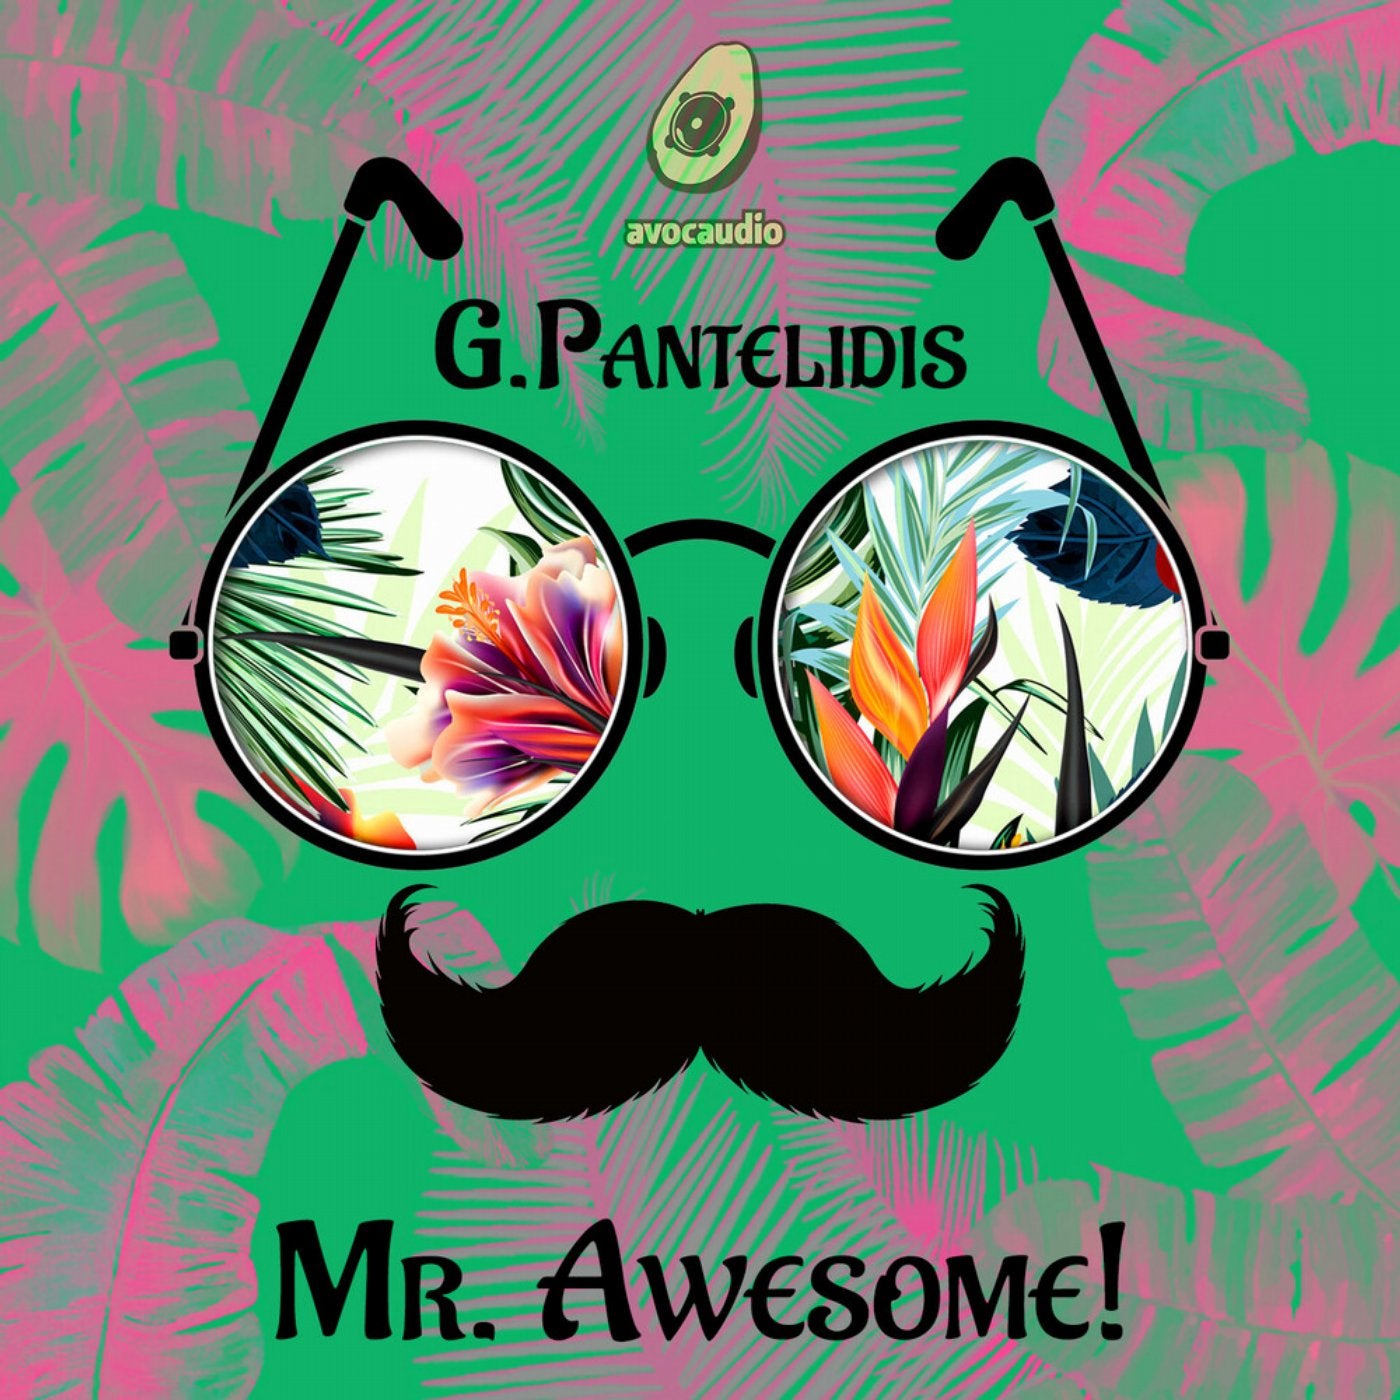 Mr. Awesome!